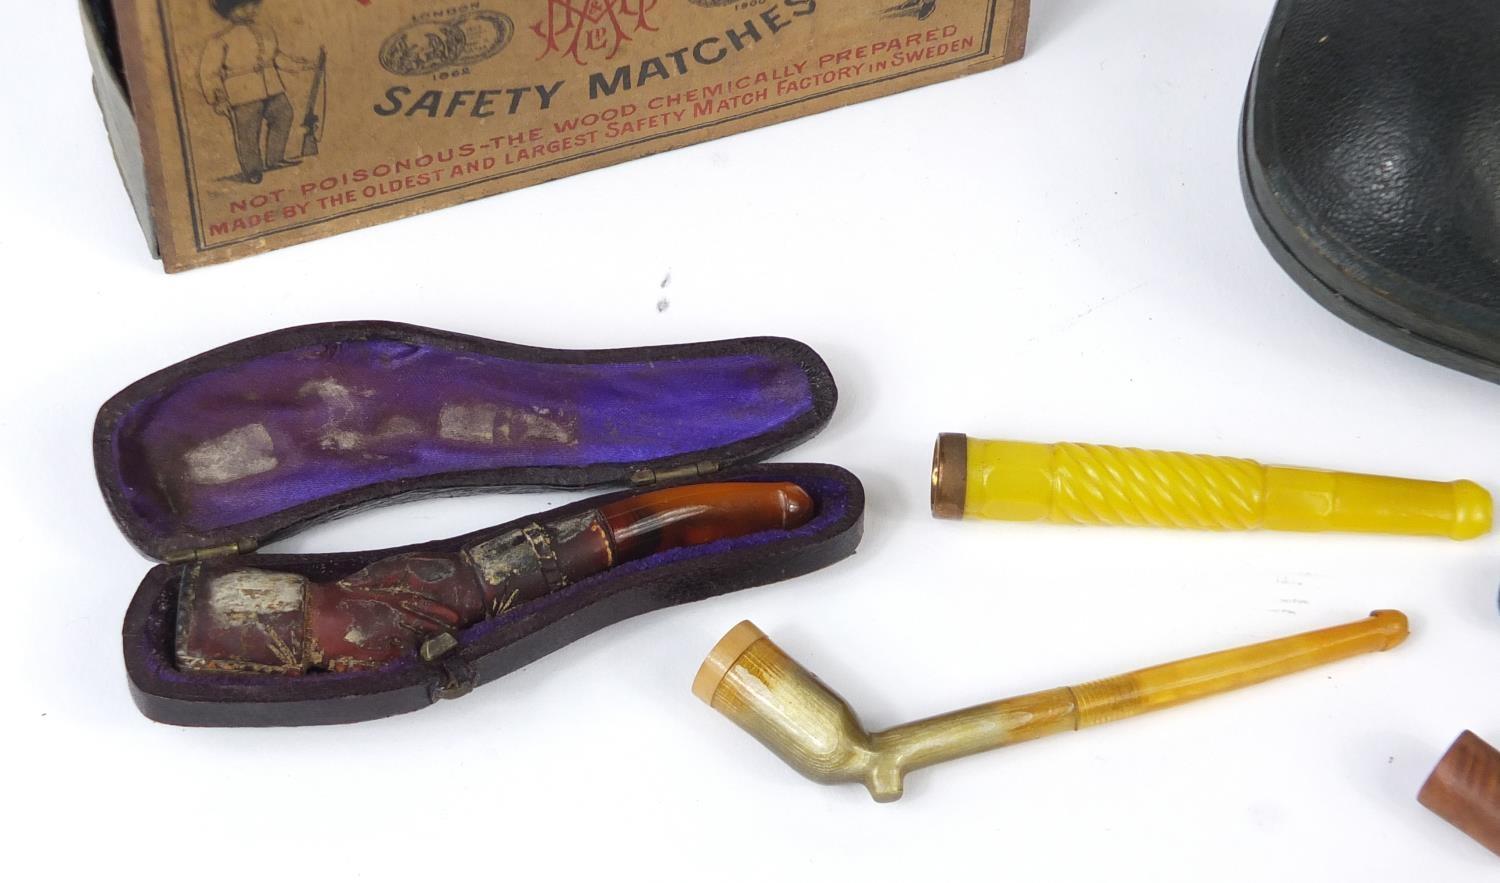 Vintage smoking items including a Meerschaum hand pipe, cheroots and an Army and Navy safety matches - Image 2 of 3